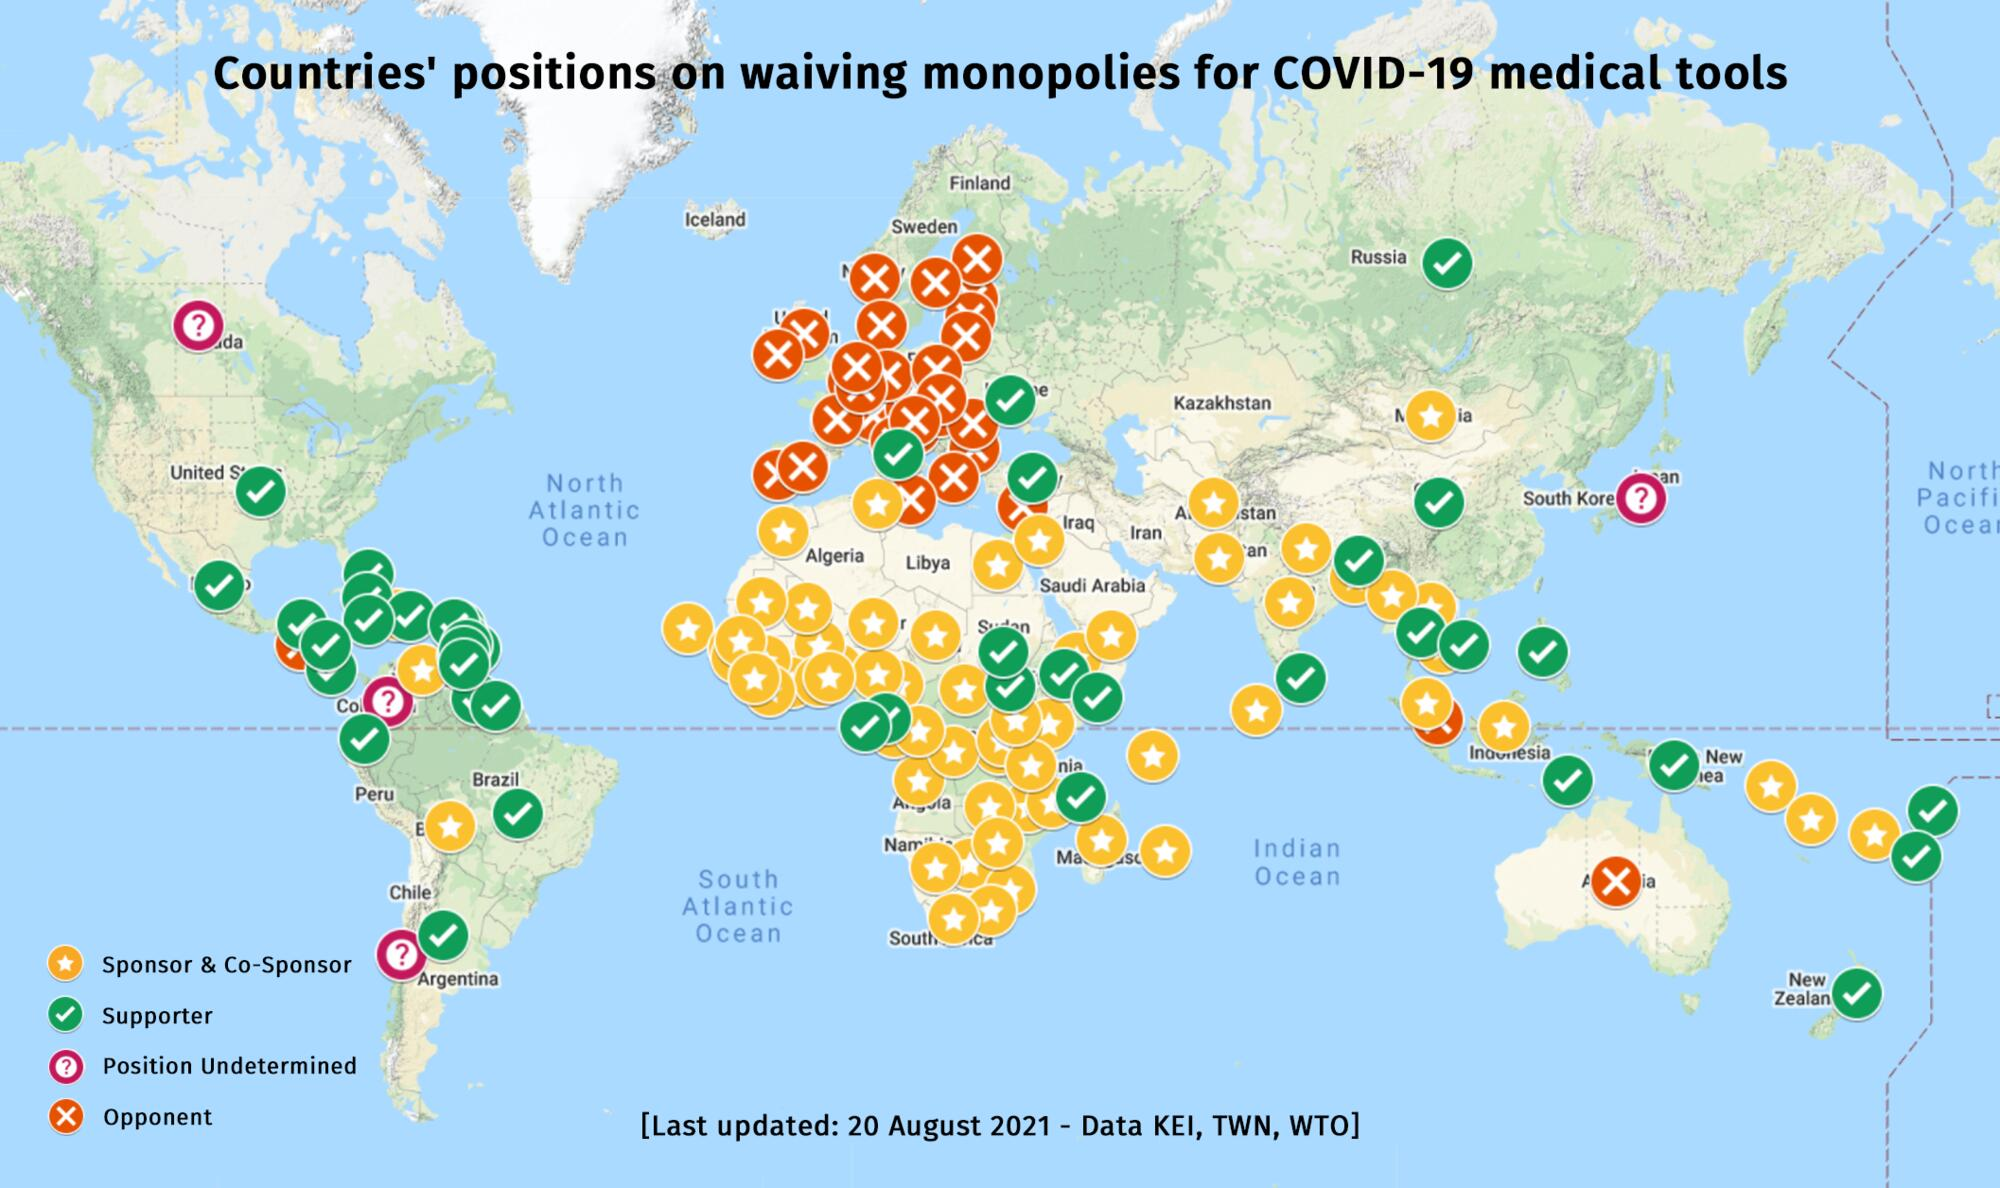 Map of the world showing countries that oppose, approve, or are unsure of a patent waiver on COVID-19 vaccines. Image shows that the vast majority of European countries oppose a patent waiver.